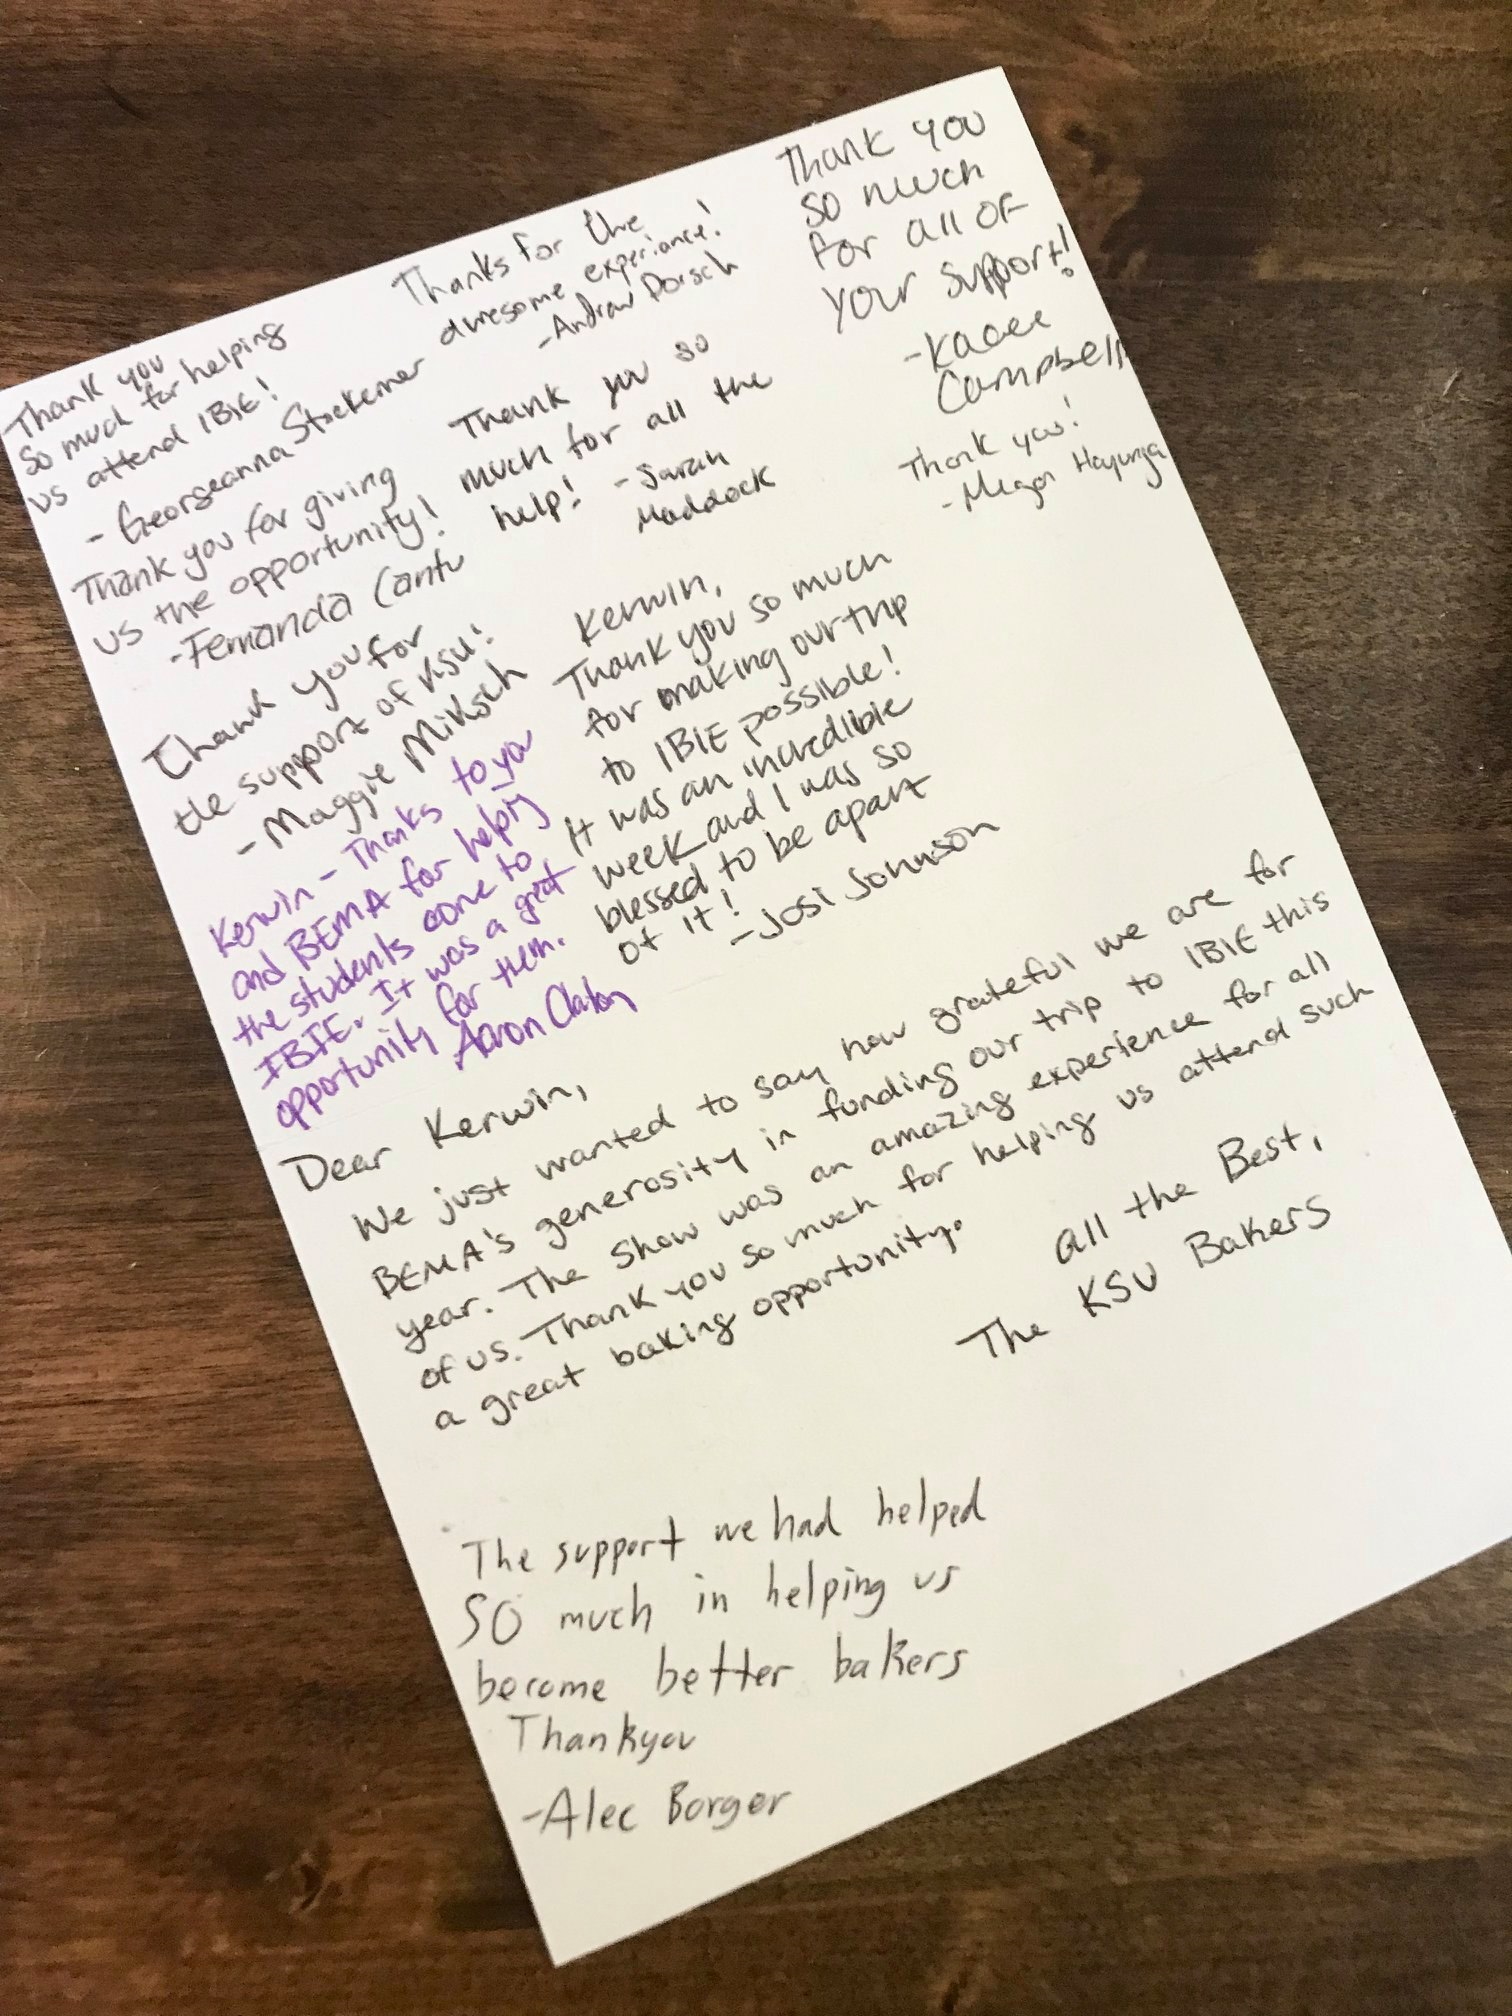 Kind thank you note from Kansas State students who attended IBIE 2019